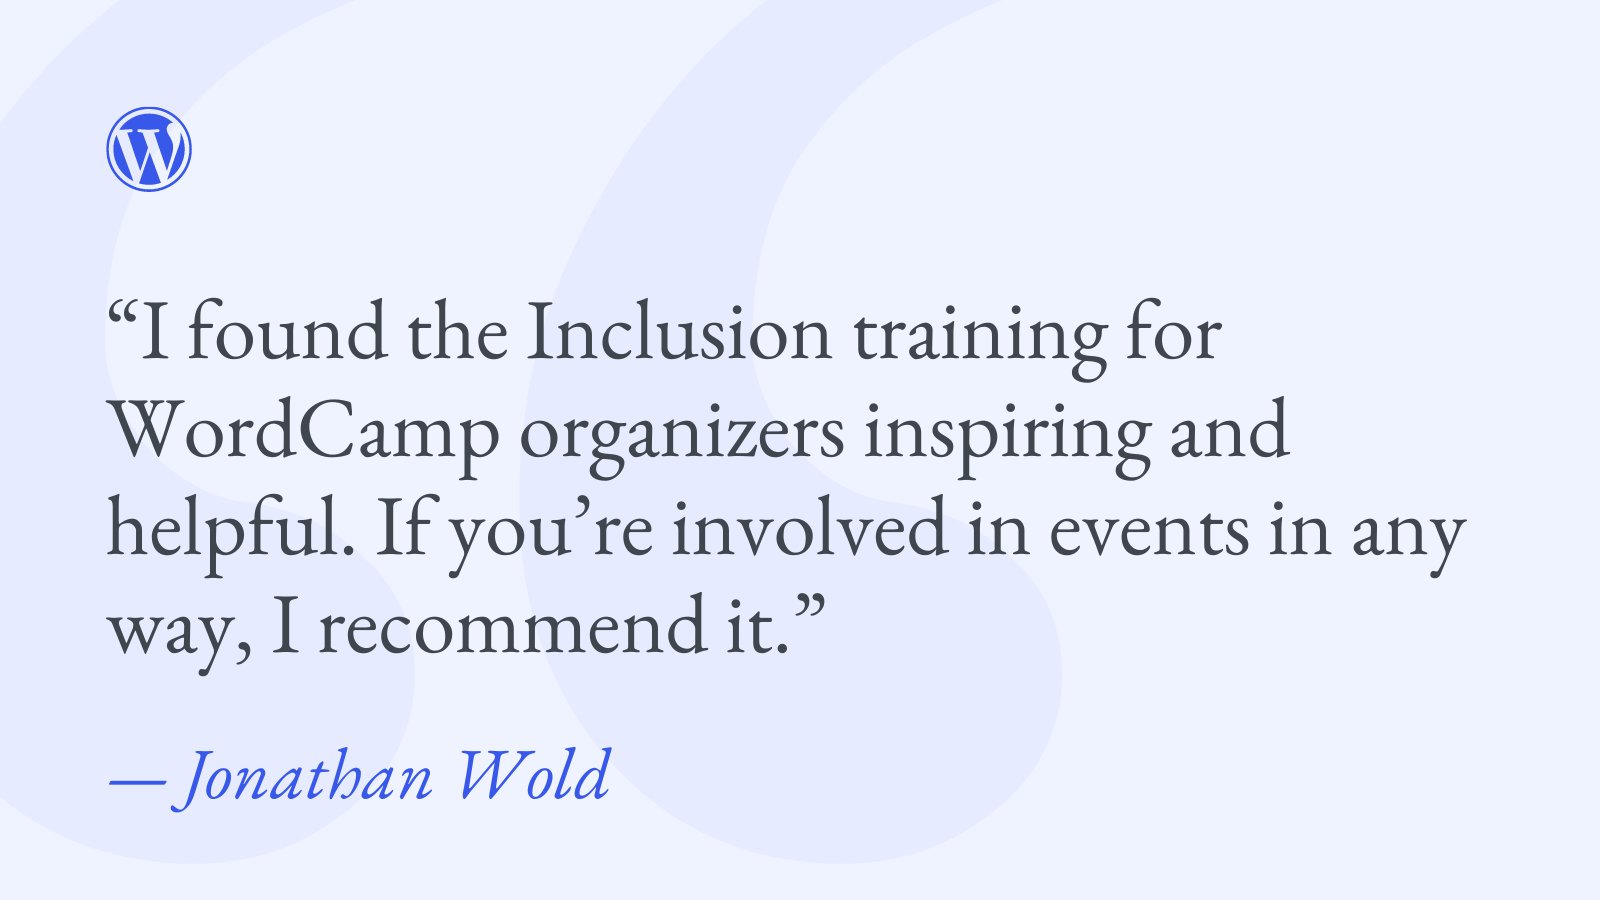 Blue background with blue WordPress logo and text, "I found the Inclusion training for WordCamp organizers inspiring and helpful. If you’re involved in events in any way, I recommend it. -Jonathan Wold"